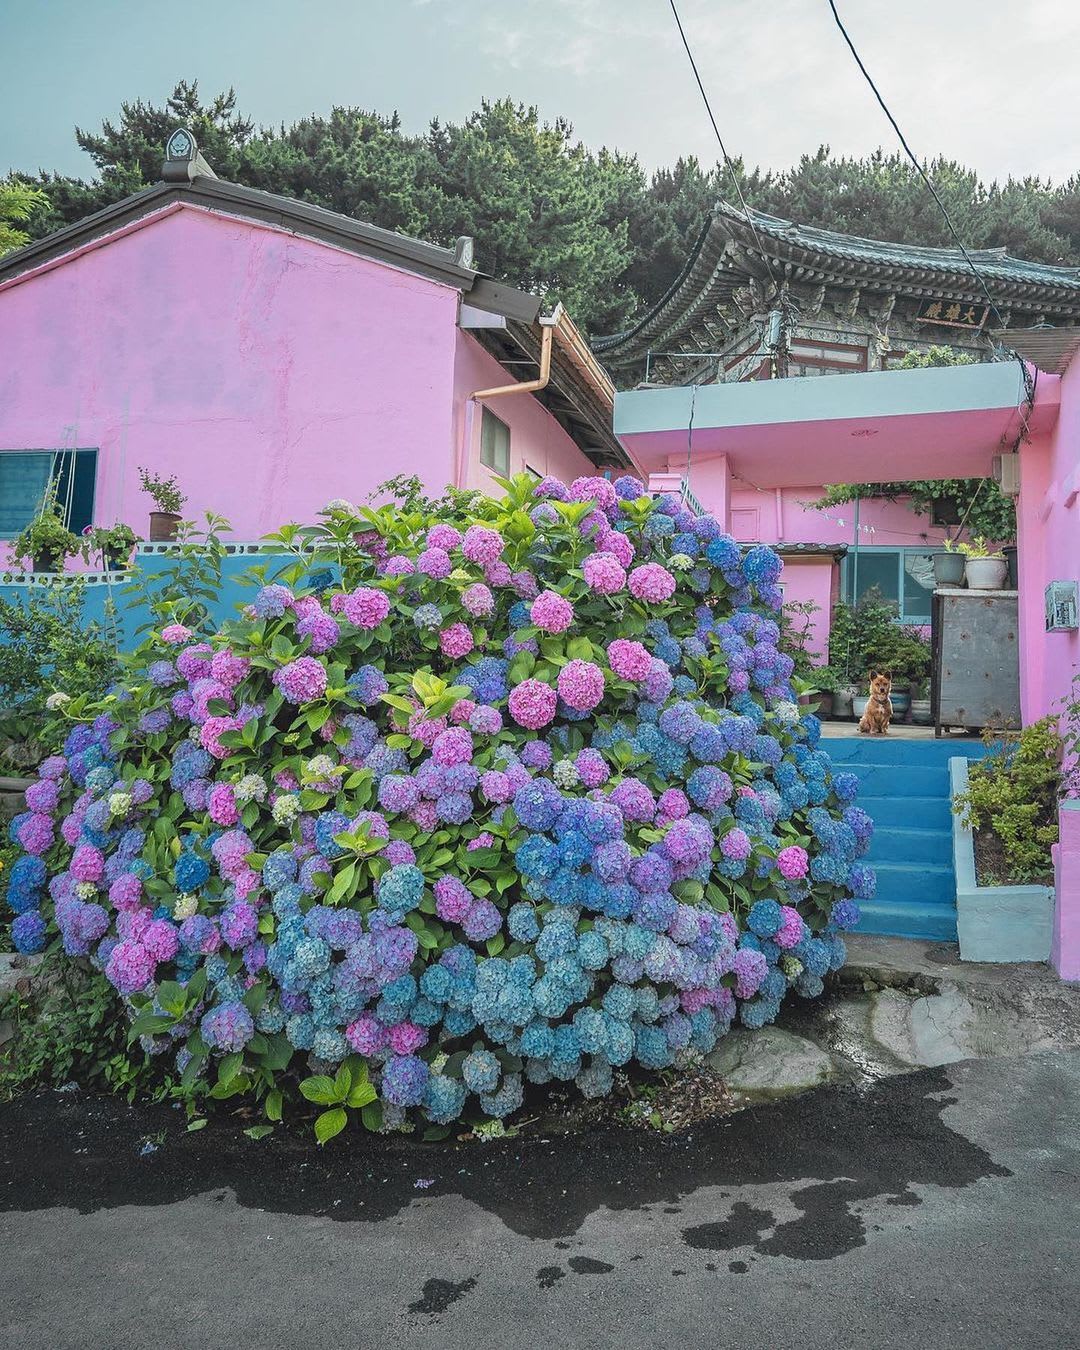 Shrub full of lush hydrangea blossoms in front of a pink home in Yeongdo Island, Busan, South Korea.